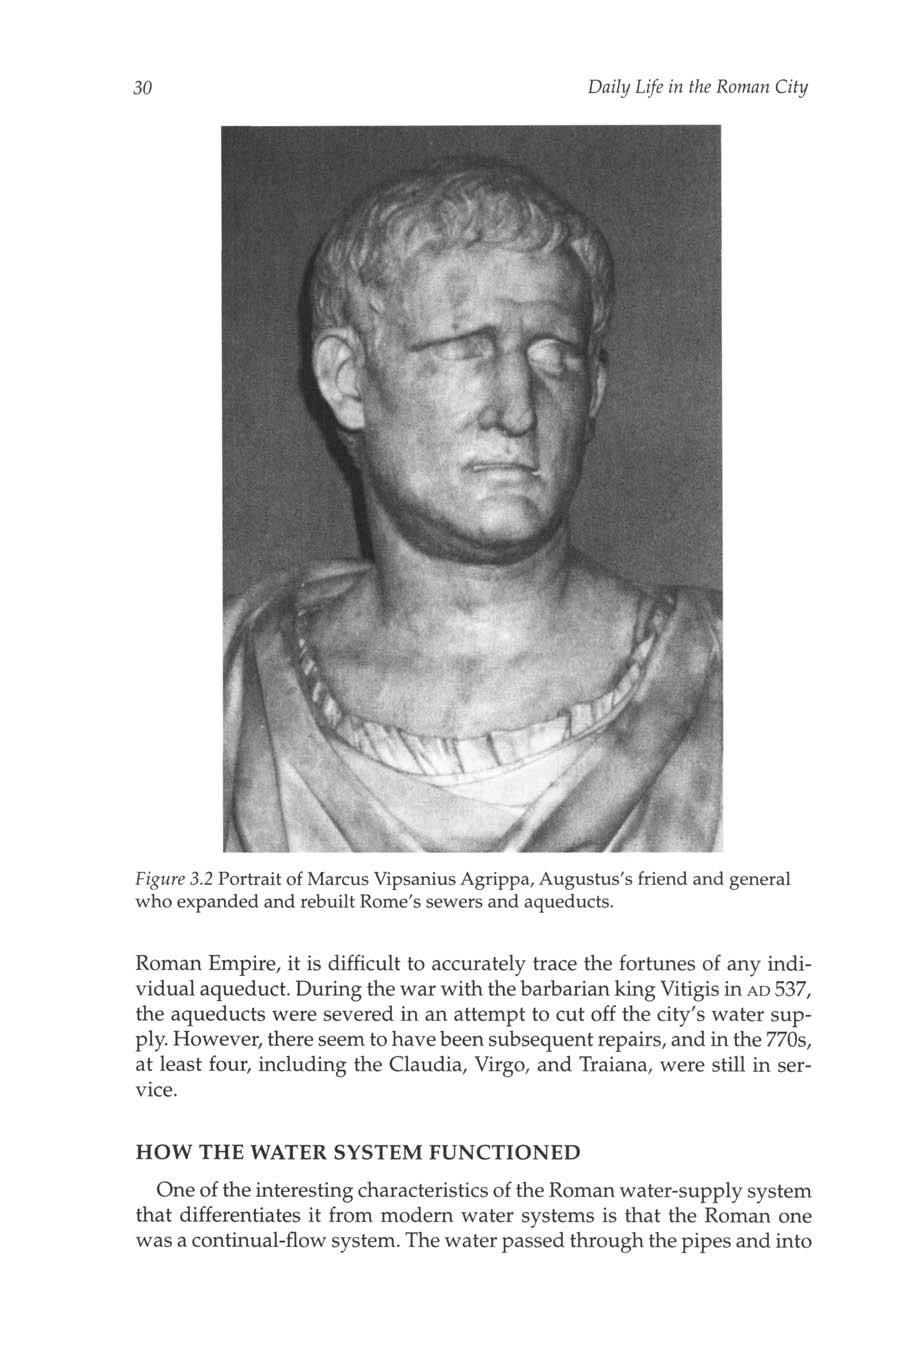 30 Daily Life in the Roman City Figure 3.2 Portrait of Marcus Vipsanius Agrippa, Augustus's friend and general who expanded and rebuilt Rome's sewers and aqueducts.